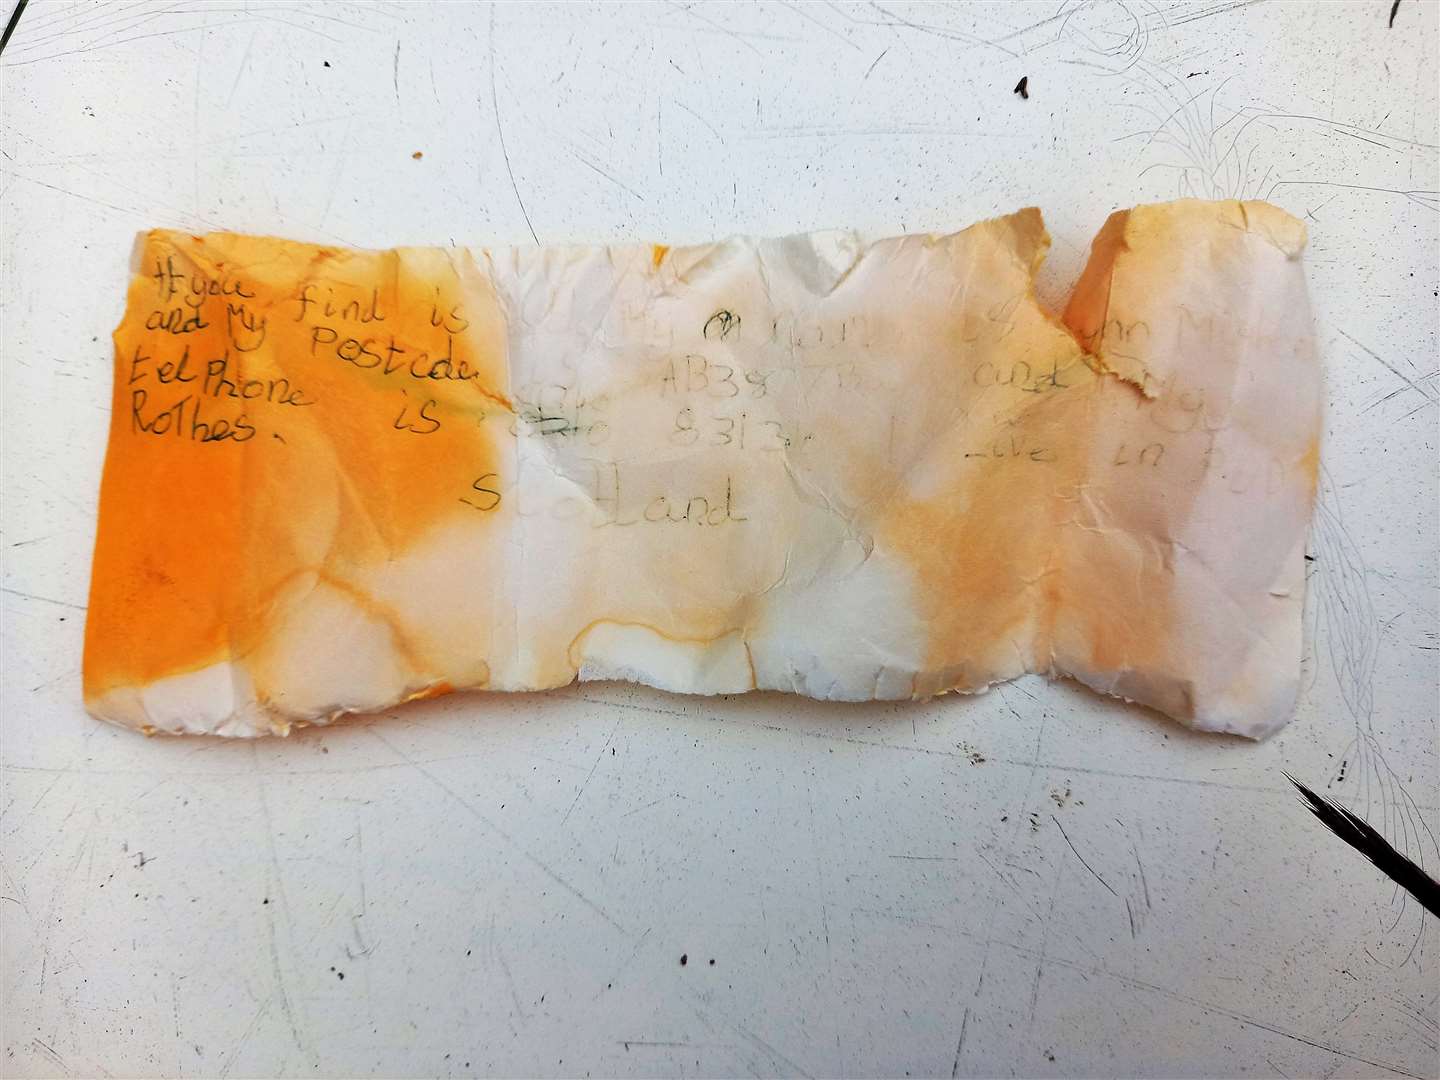 The orange scrap of paper the message was written on has become faded over the years.